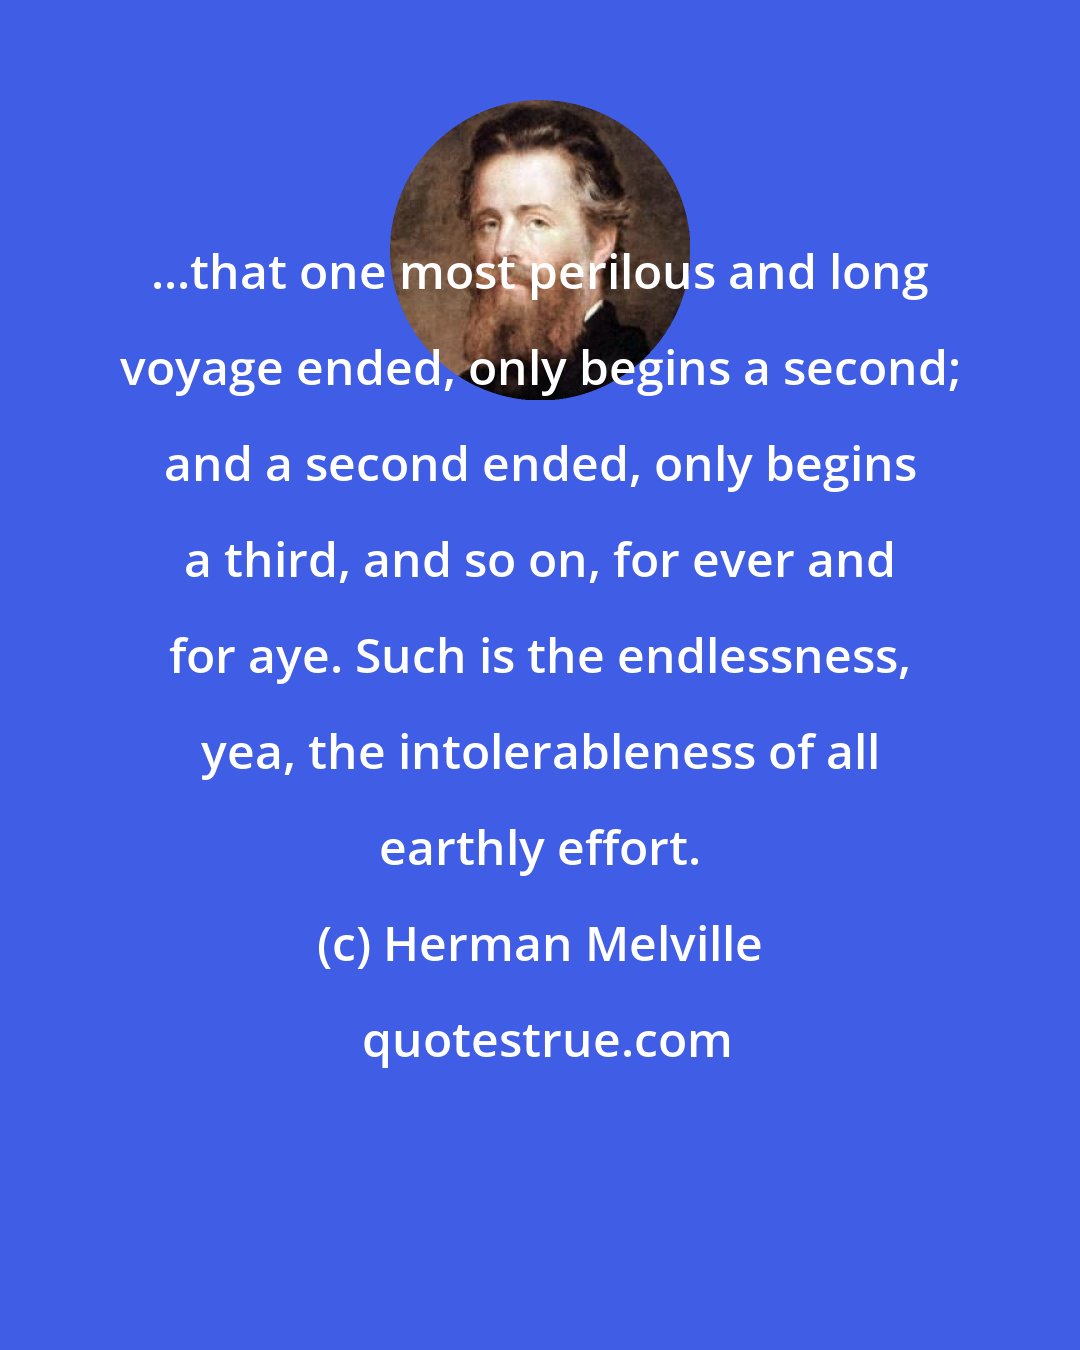 Herman Melville: ...that one most perilous and long voyage ended, only begins a second; and a second ended, only begins a third, and so on, for ever and for aye. Such is the endlessness, yea, the intolerableness of all earthly effort.